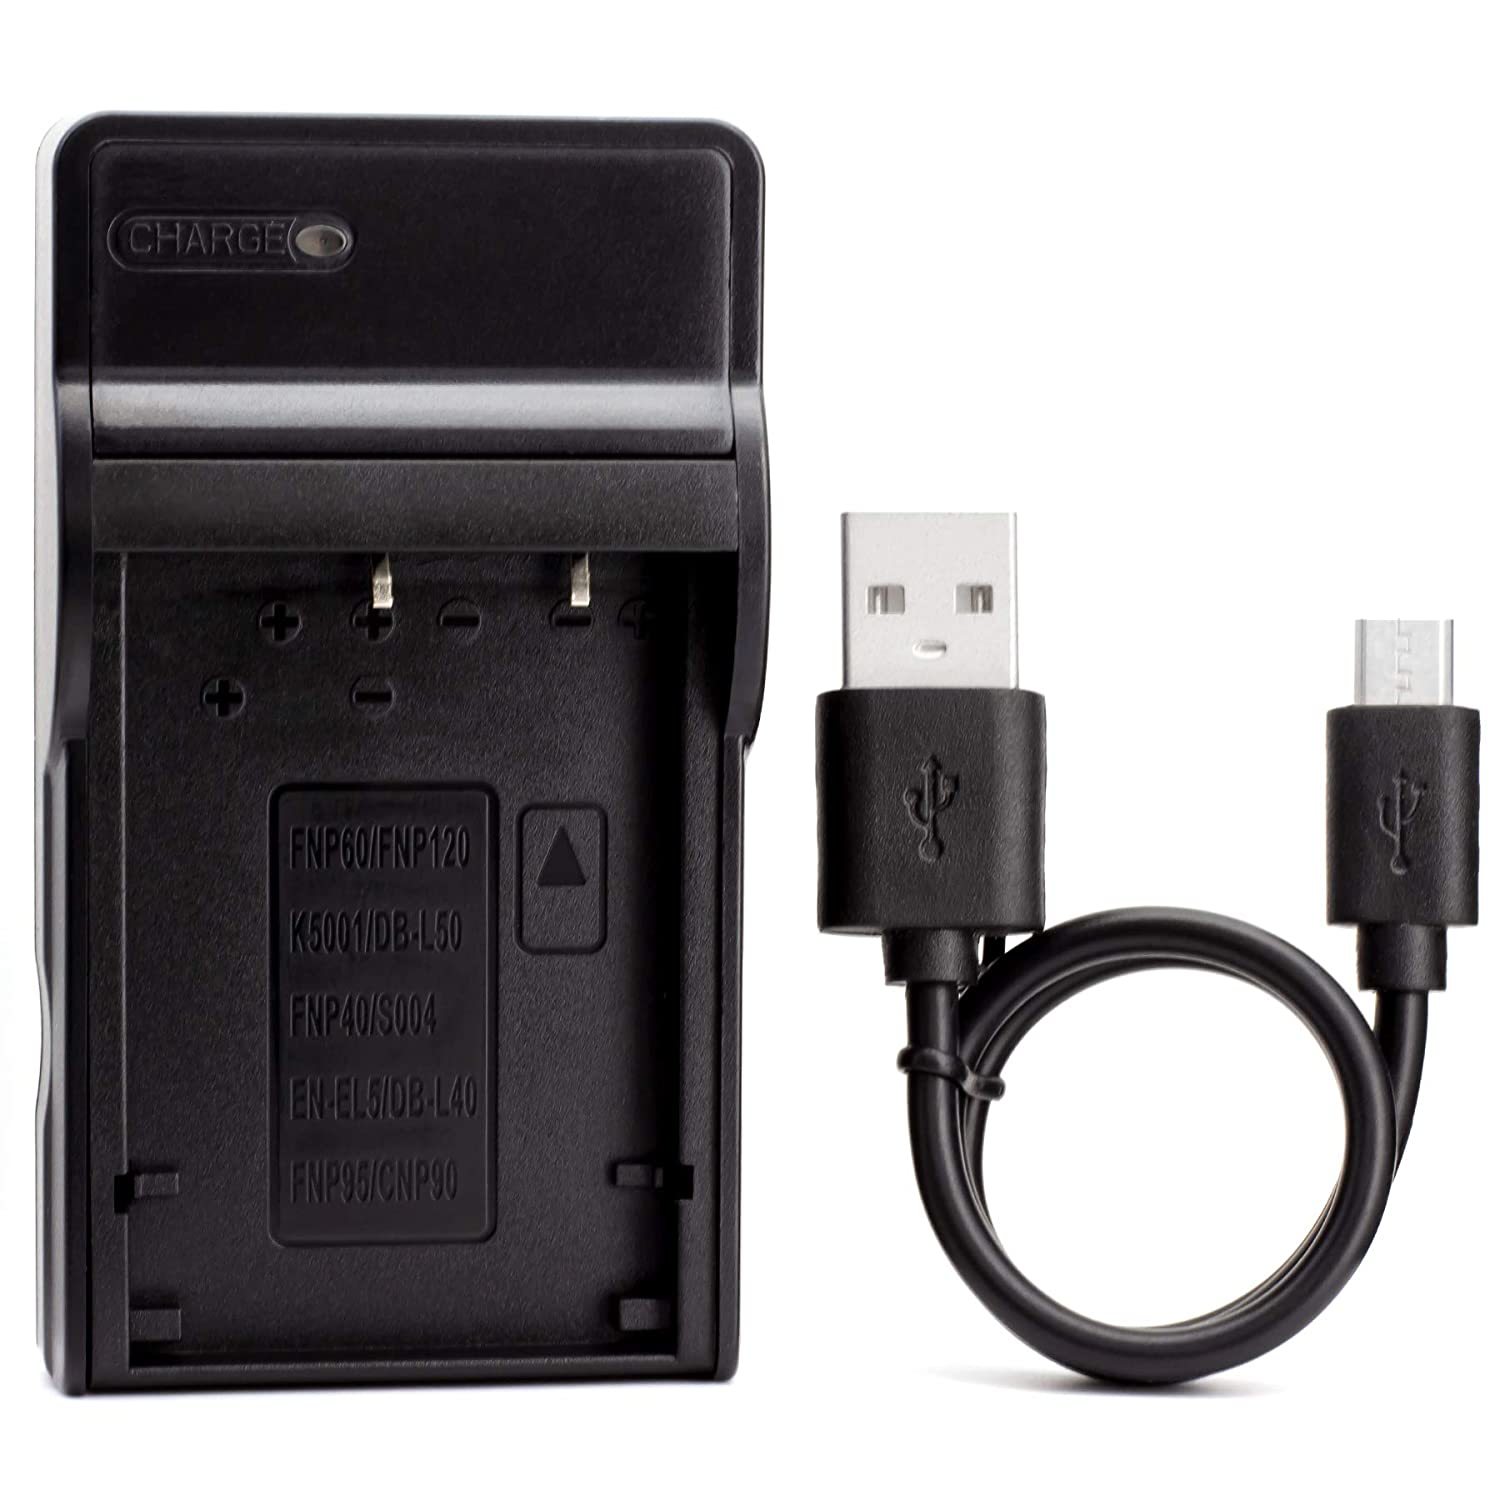 Np-60 Usb Charger For Finepix 50I, 601, F401, F401 Zoom, F410, F410 Zo - $16.48